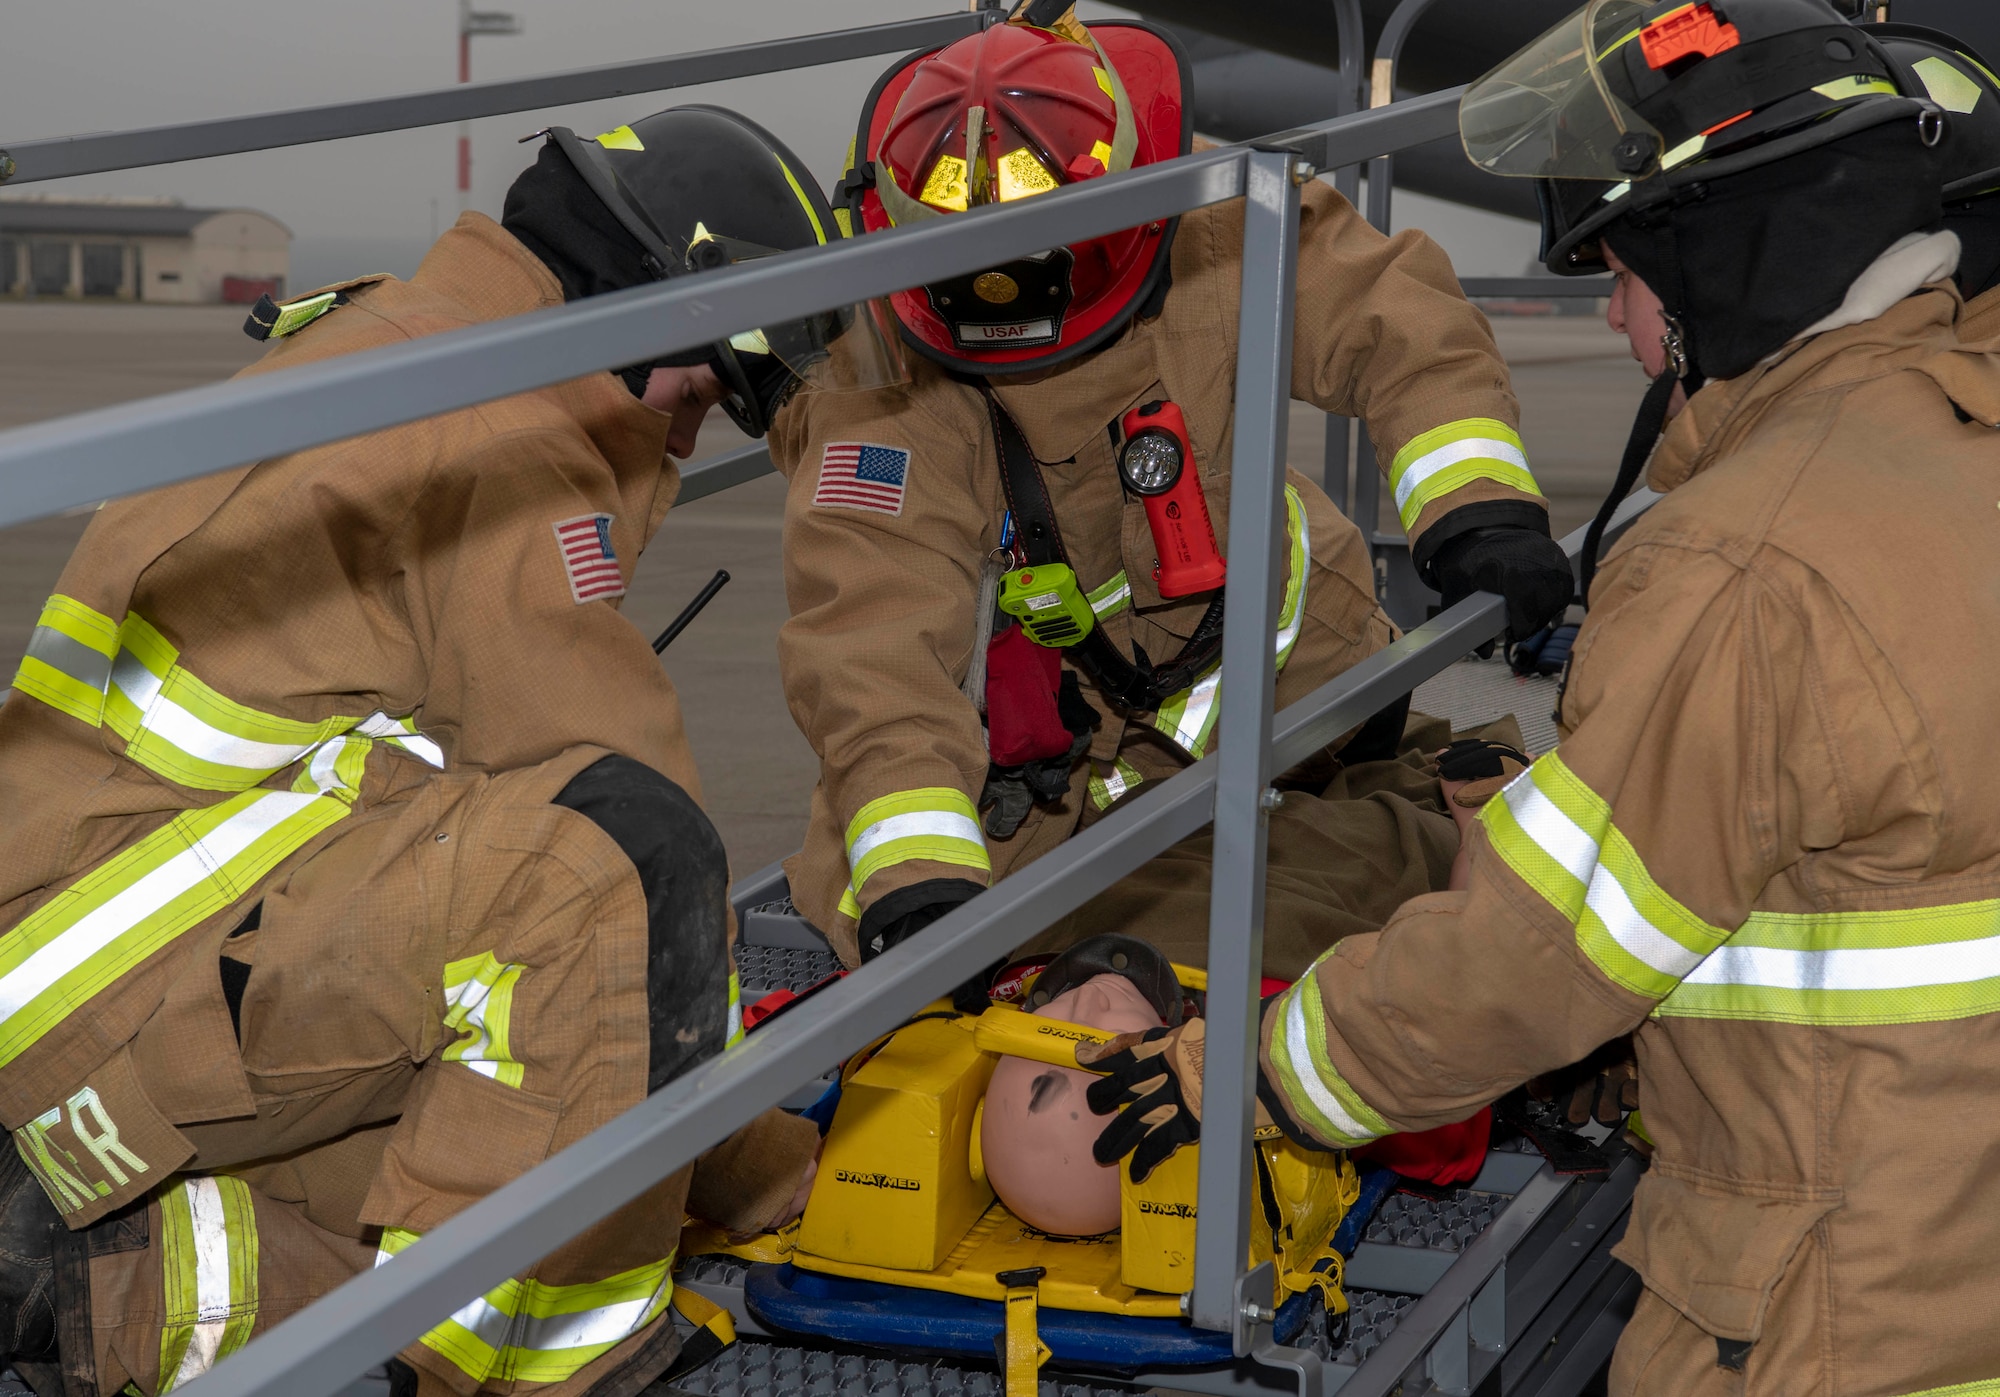 U.S. Air Force firefighters from the 52nd Civil Engineer Squadron secure a dummy to a backboard during a fall protection exercise at Spangdahlem Air Base, Germany, Jan. 23, 2020. The firefighters partnered with the 726th Air Mobility Squadron to perform the training exercise. (U.S. Air Force photo by Senior Airman Kyle Cope)